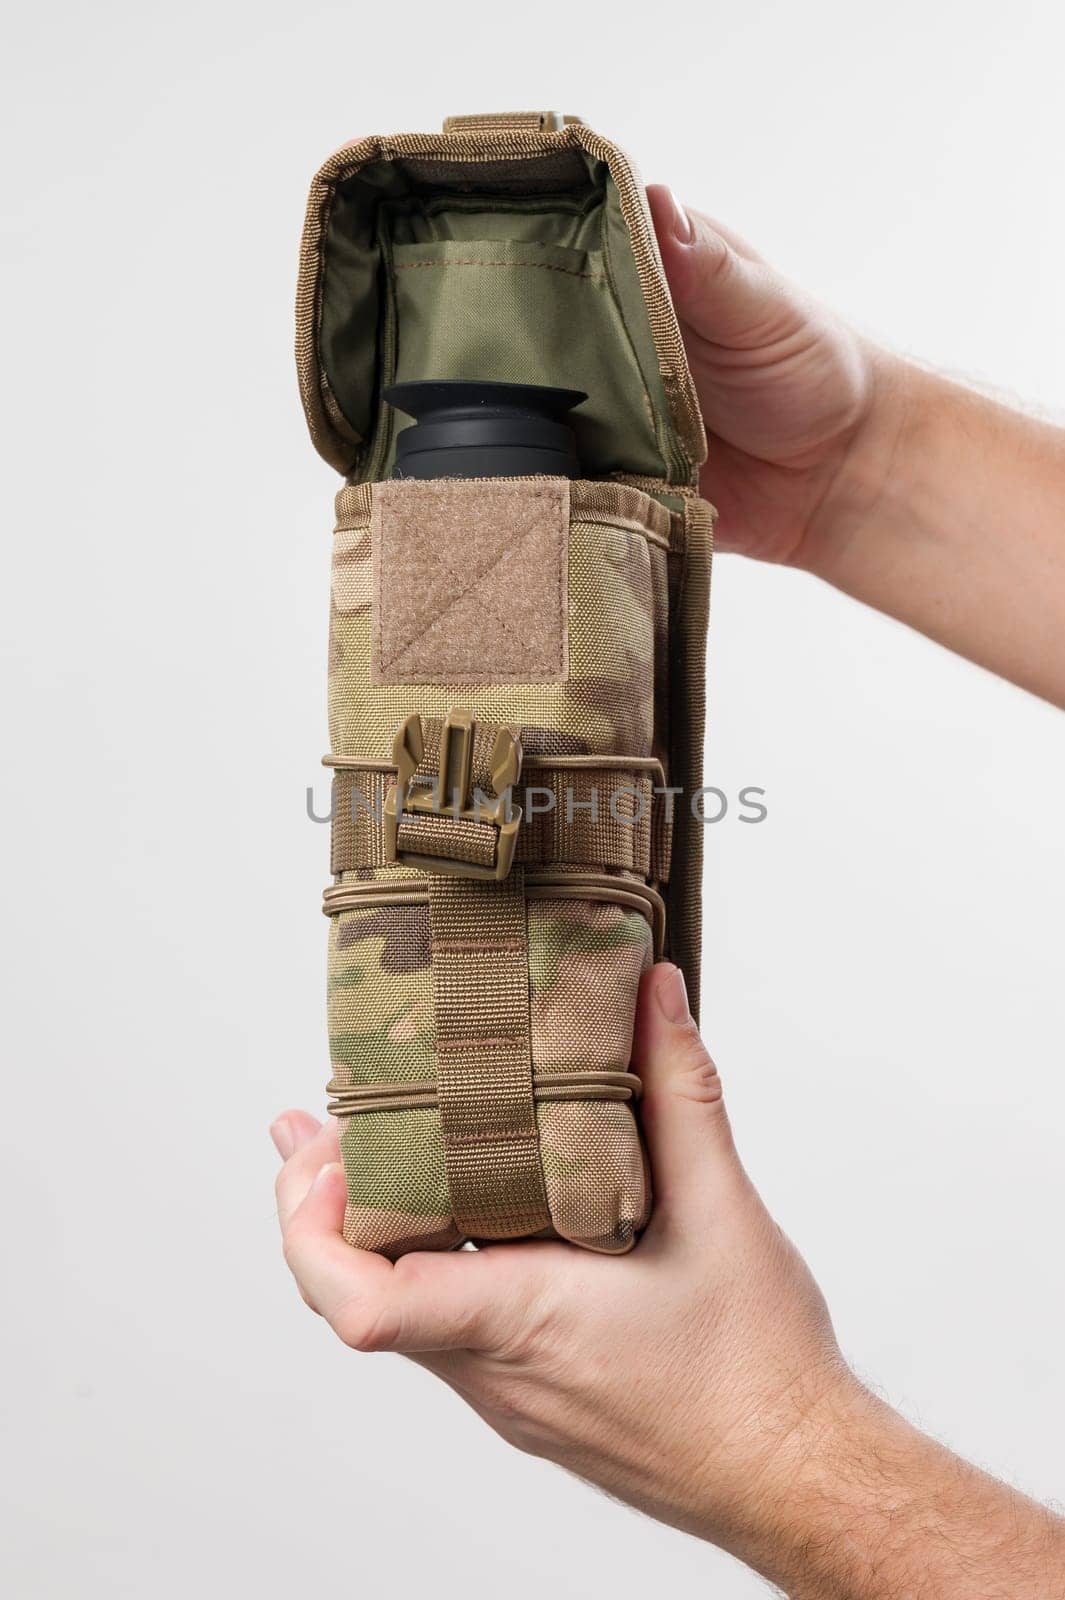 Bag - pixel military style case for monocular storage isolated on white background.